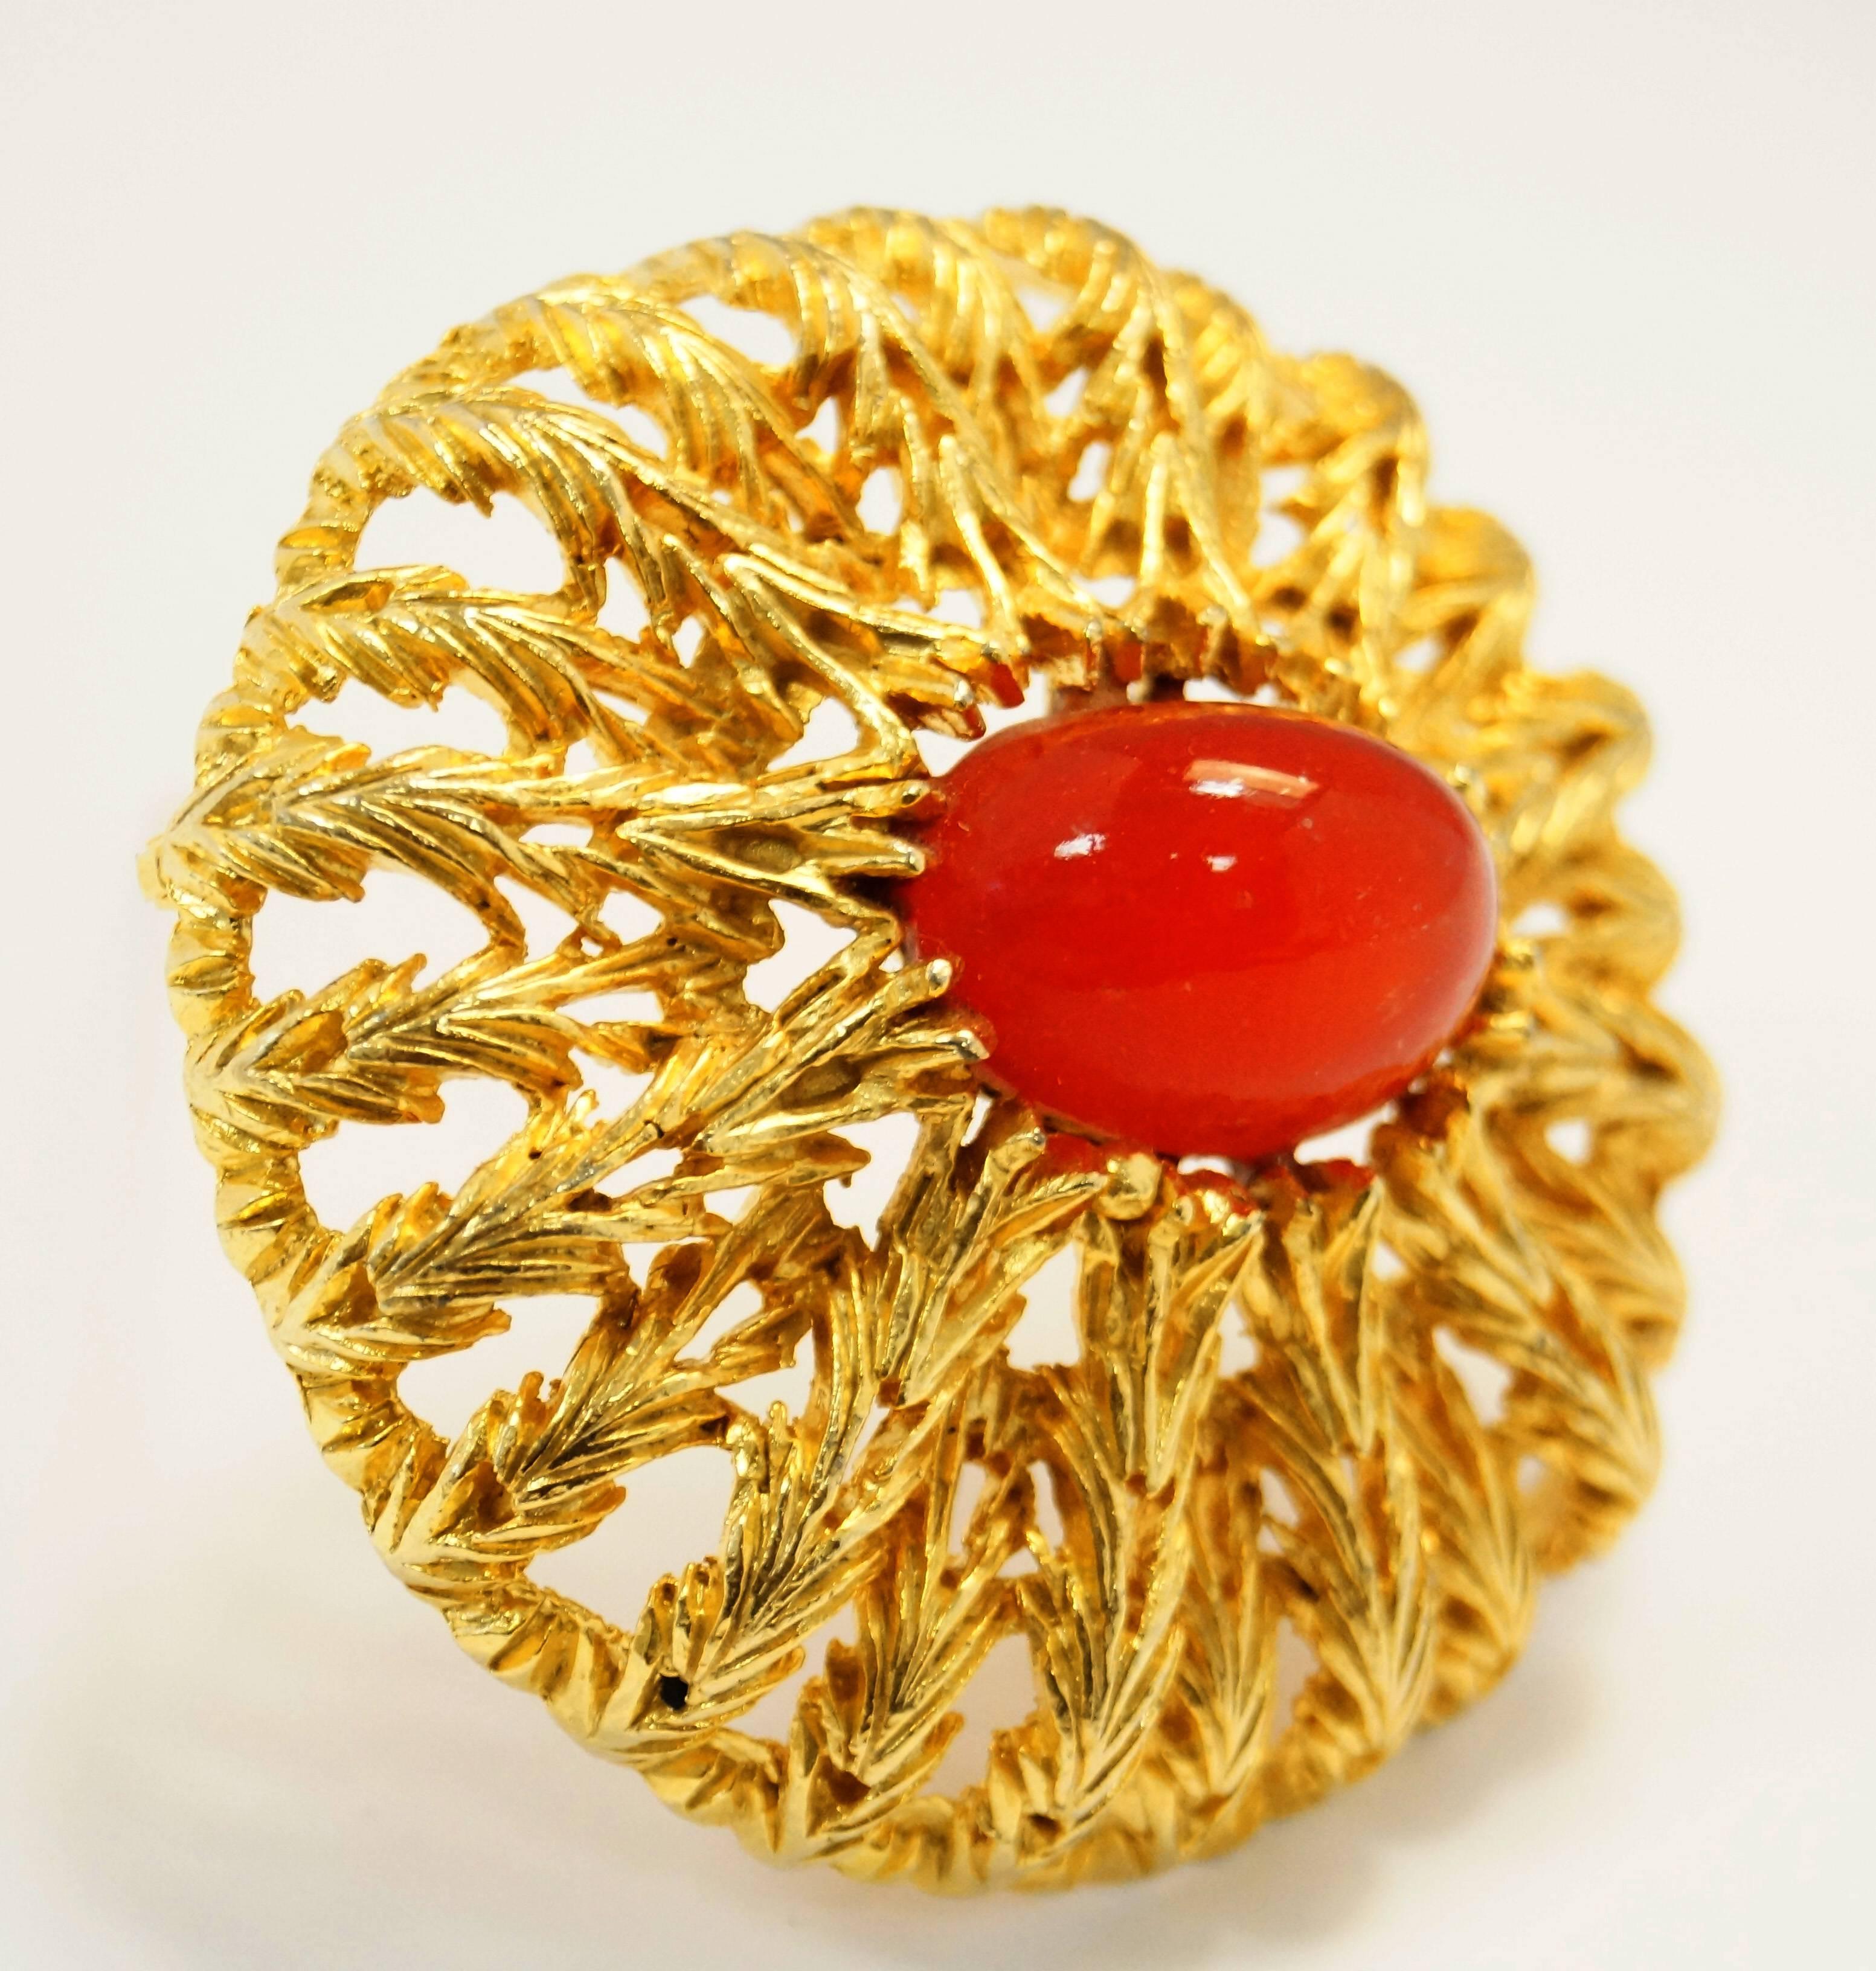 
Absolutely show stopping vintage brooch by Elsa Schiaparelli! This brooch features an oval vermillion cabochon surrounded by organic chevron-shaped floral flourishes in a radial pattern, creating a gorgeous and ornate sunburst design. 

*All